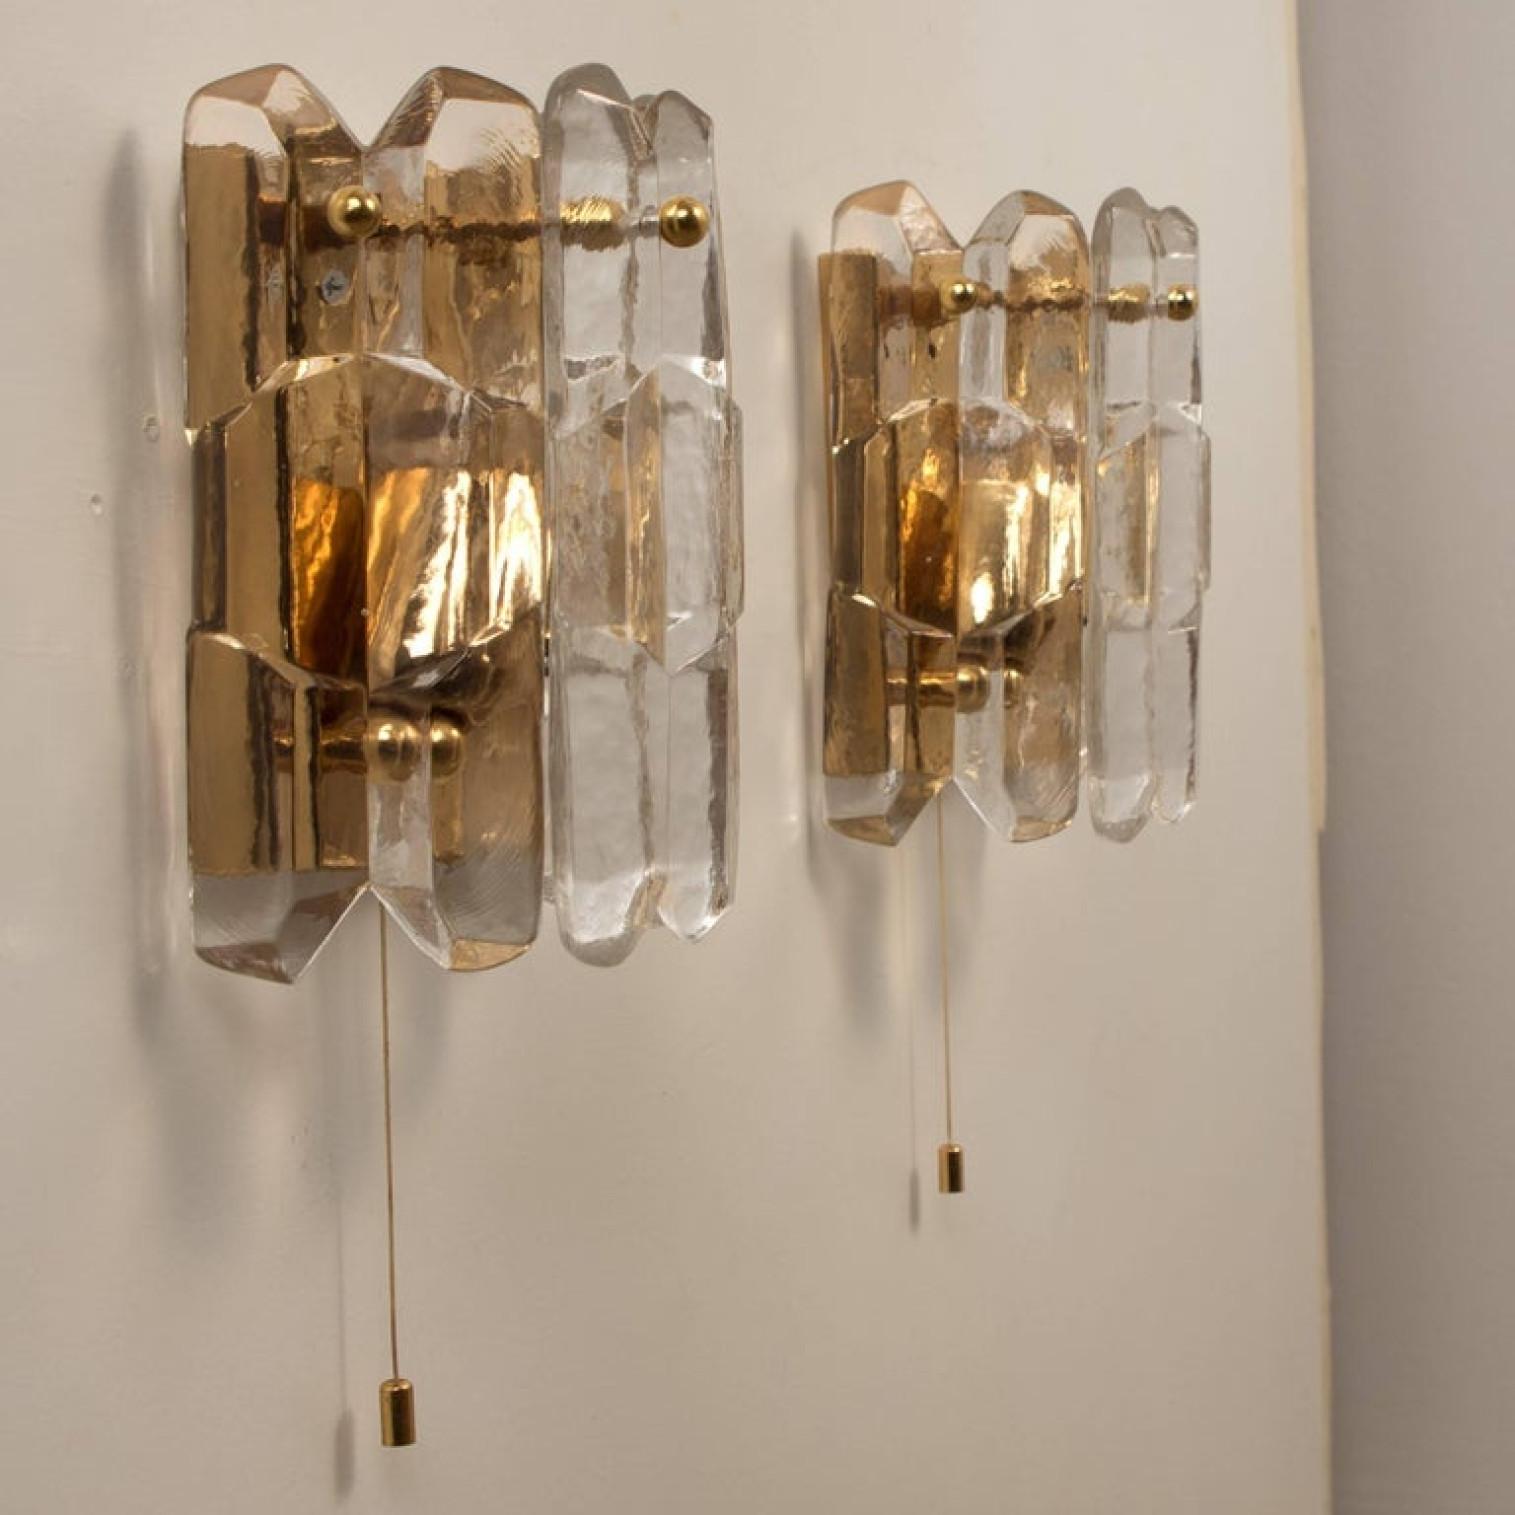 Other 1 of 2 Pair of J.T. Kalmar 'Palazzo' Wall Light Fixtures Gilt Brass and Glass For Sale